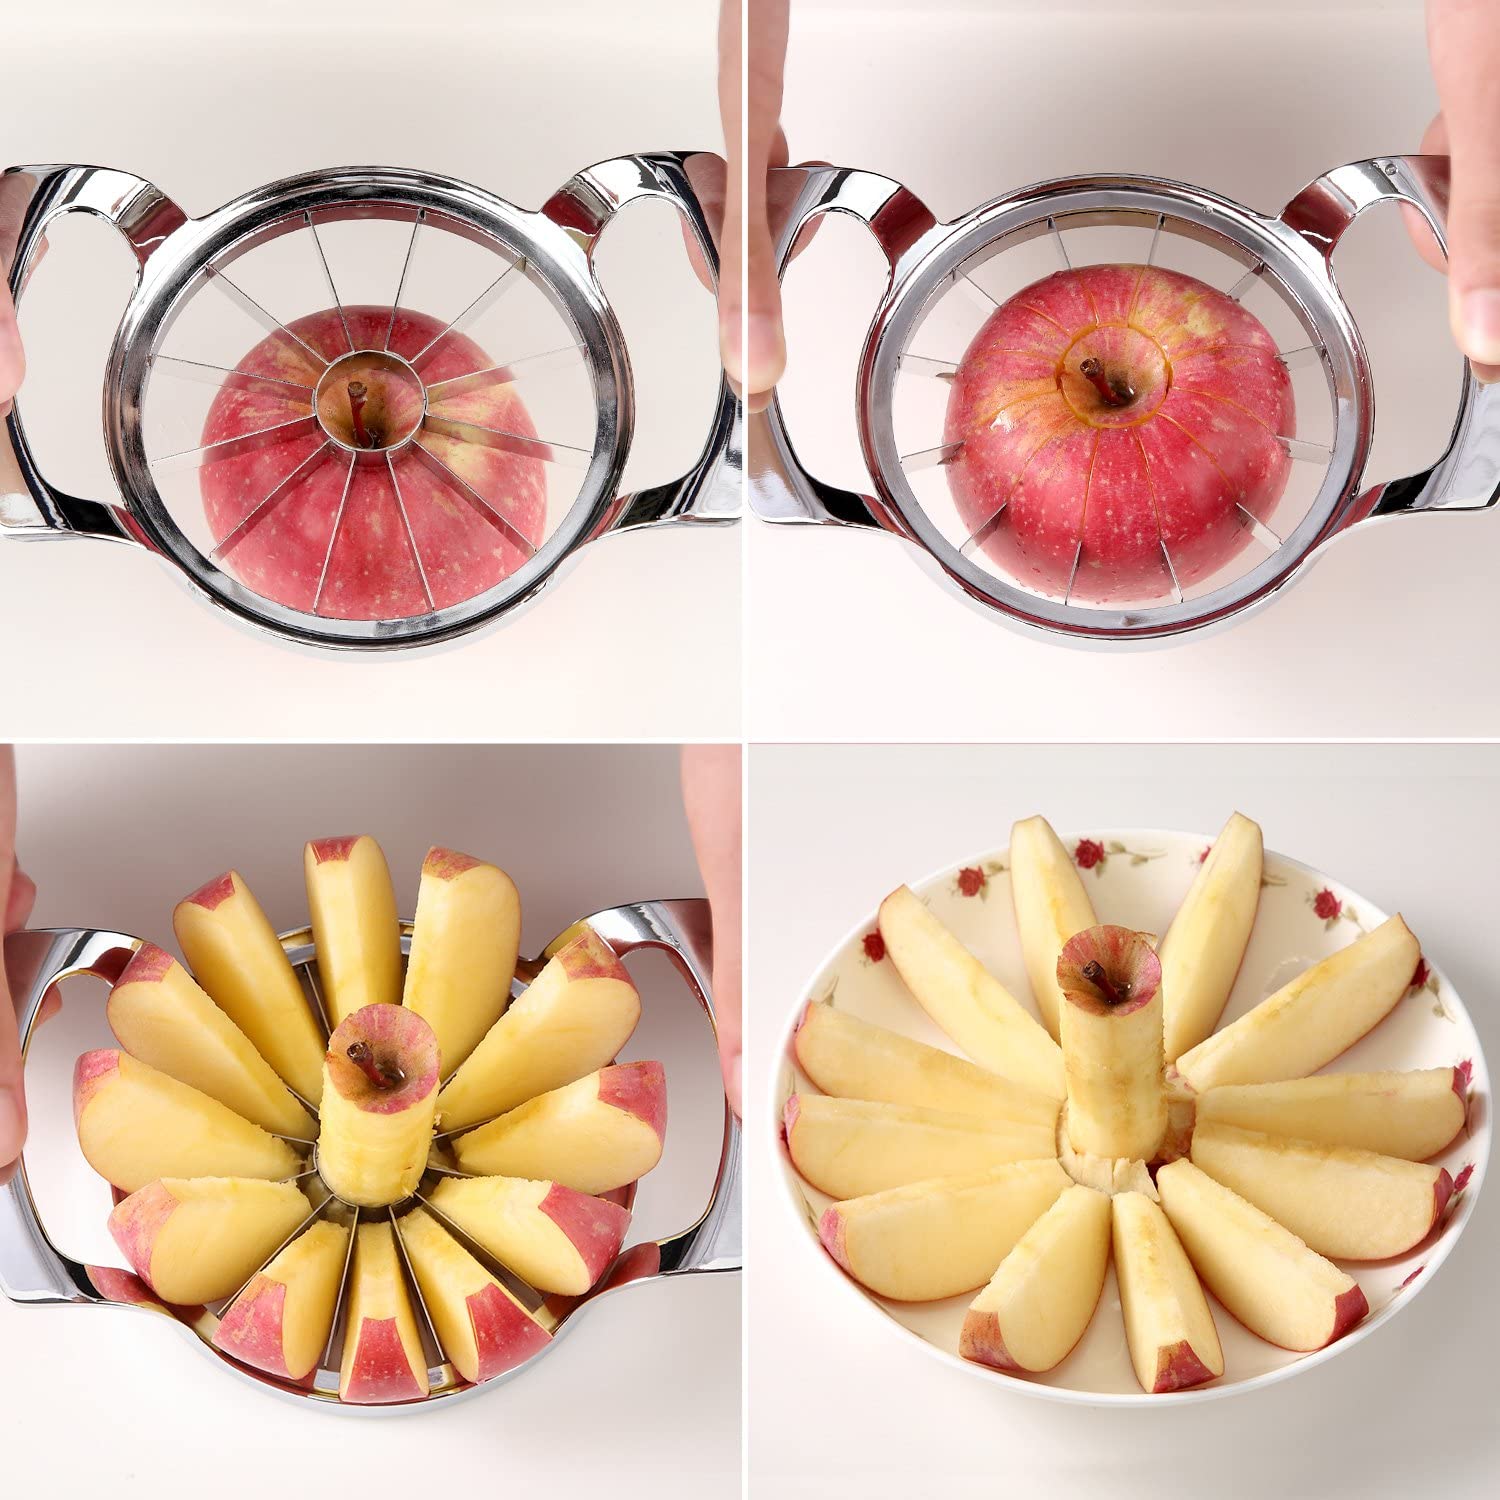 Apple Slicer with 12-Blade Extra Large Apple Cutter, Stainless Steel Ultra-Sharp Apple Corer, Heavy Duty Apple Corer Tool for Up to 4 Inches Apples - image 3 of 7